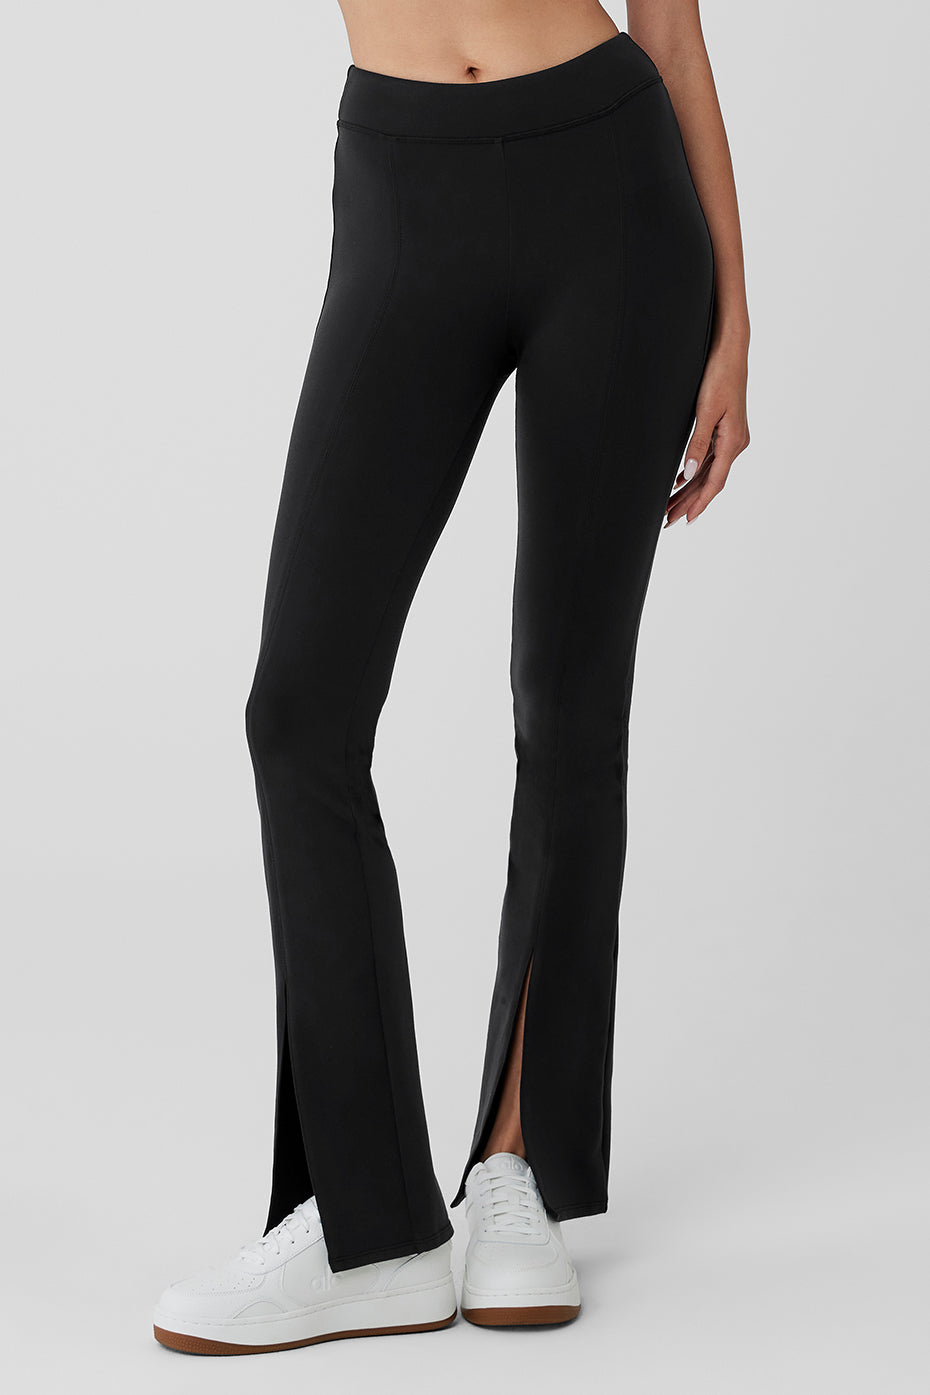 Alo Black High Waist Ripped Leggings- Size S (Inseam 29”) – The